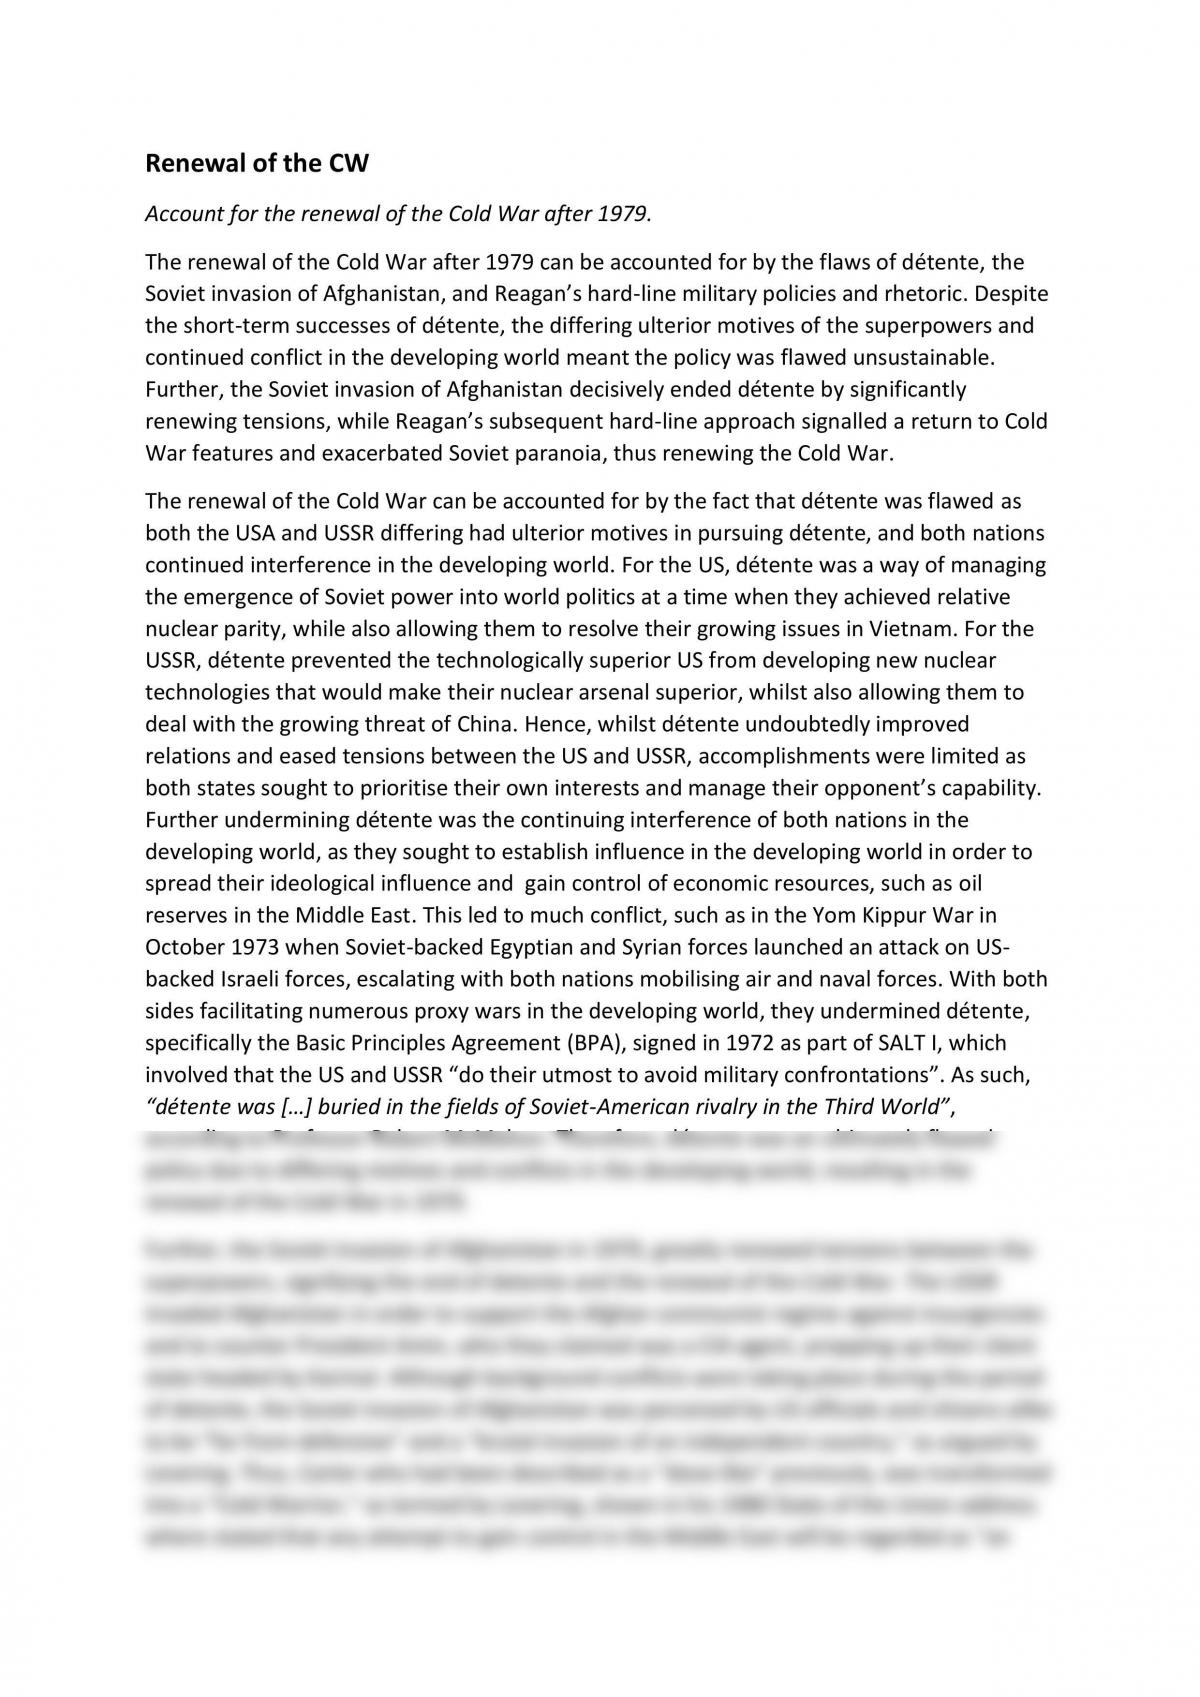 Renewal of the cold war essay - Page 1